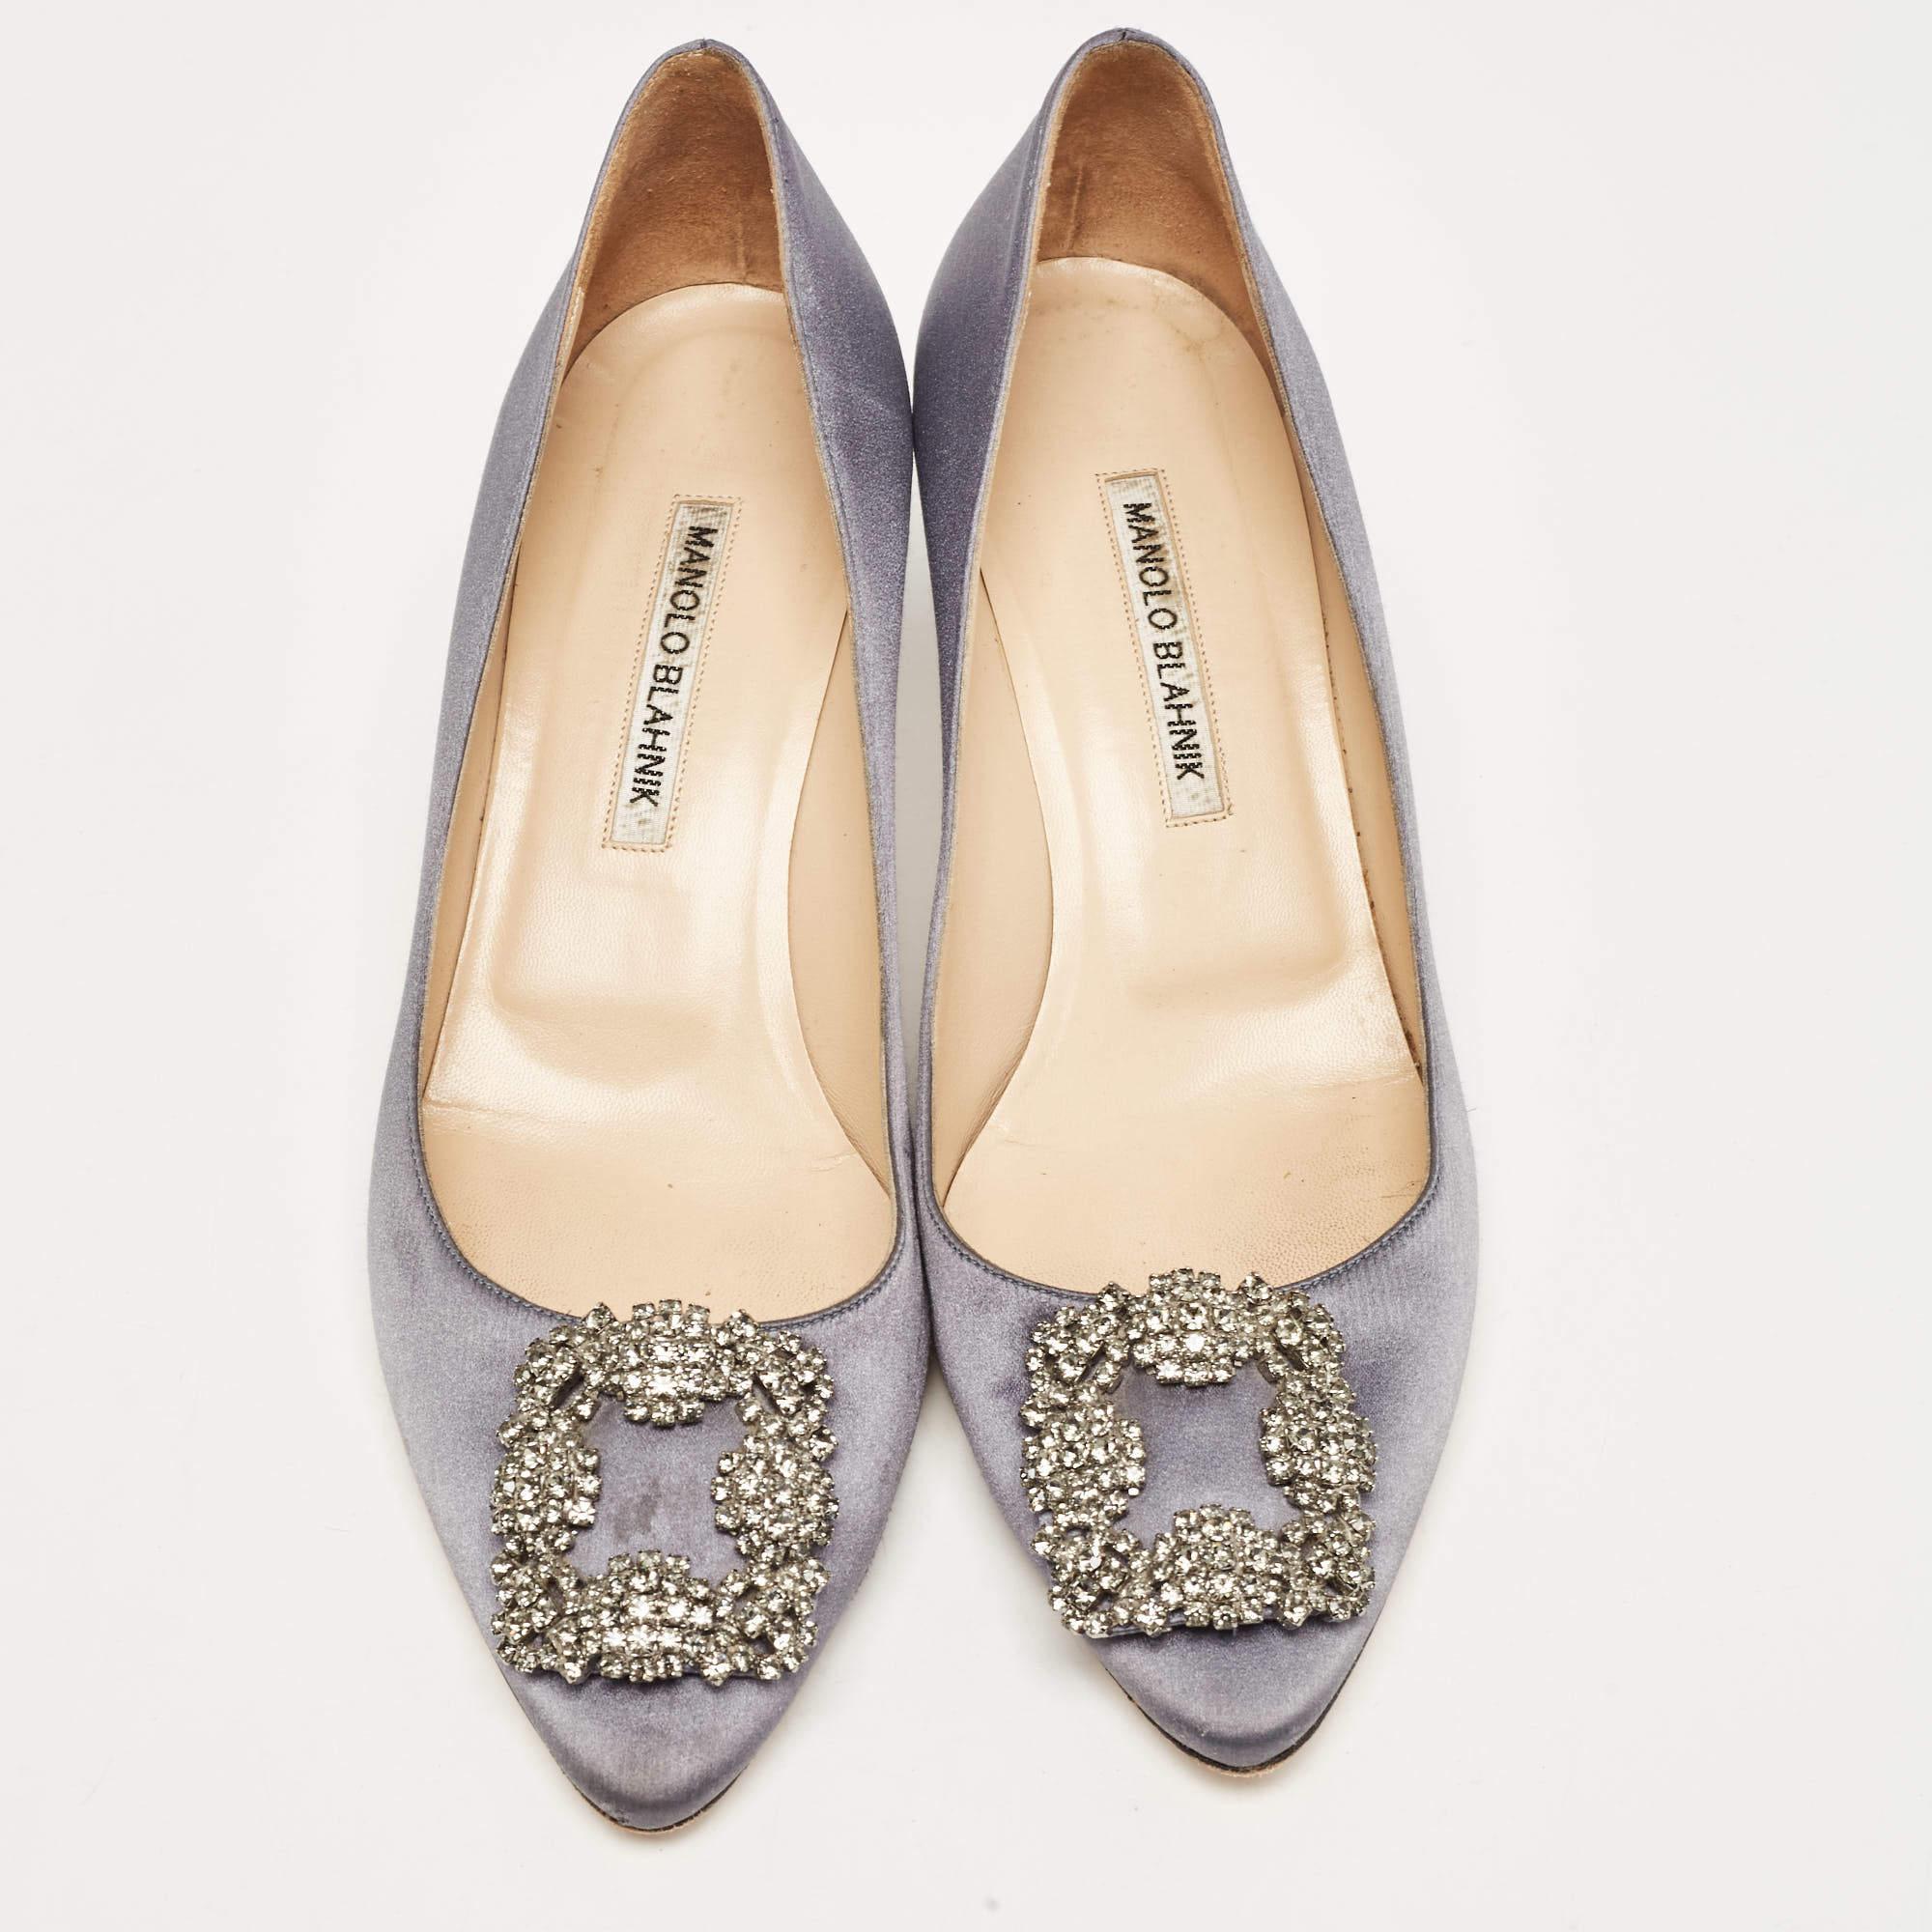 The fashion house’s tradition of excellence, coupled with modern design sensibilities, works to make these Manolo Blahnik grey pumps a fabulous choice. They'll help you deliver a chic look with ease.

